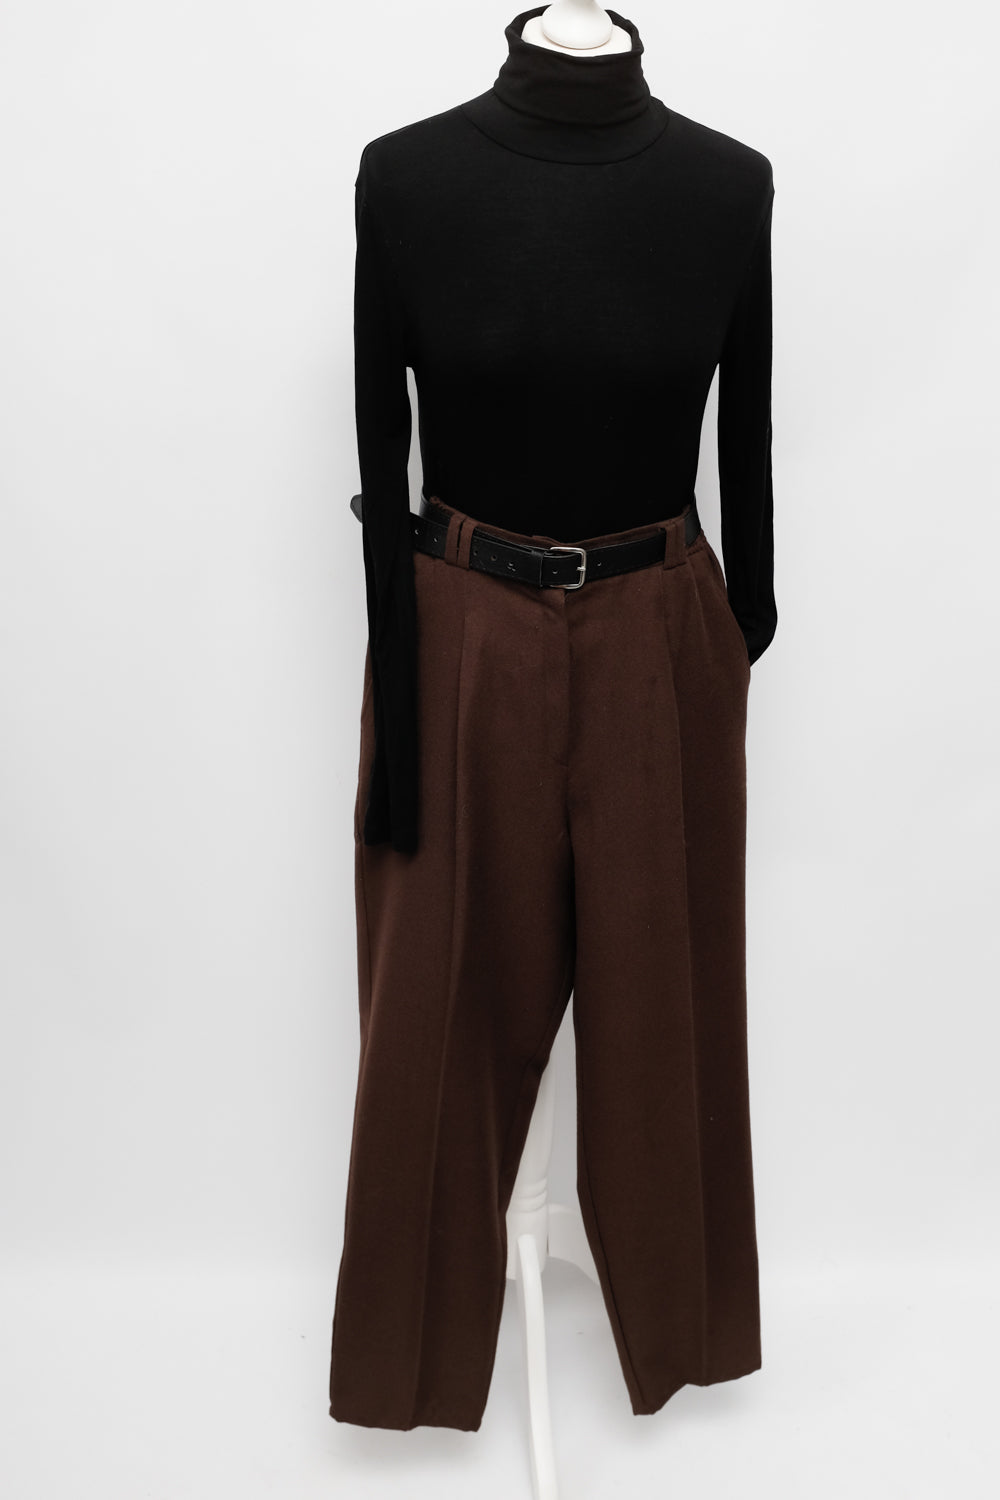 VINTAGE BROWN COSY WARM PLEATED TROUSERS